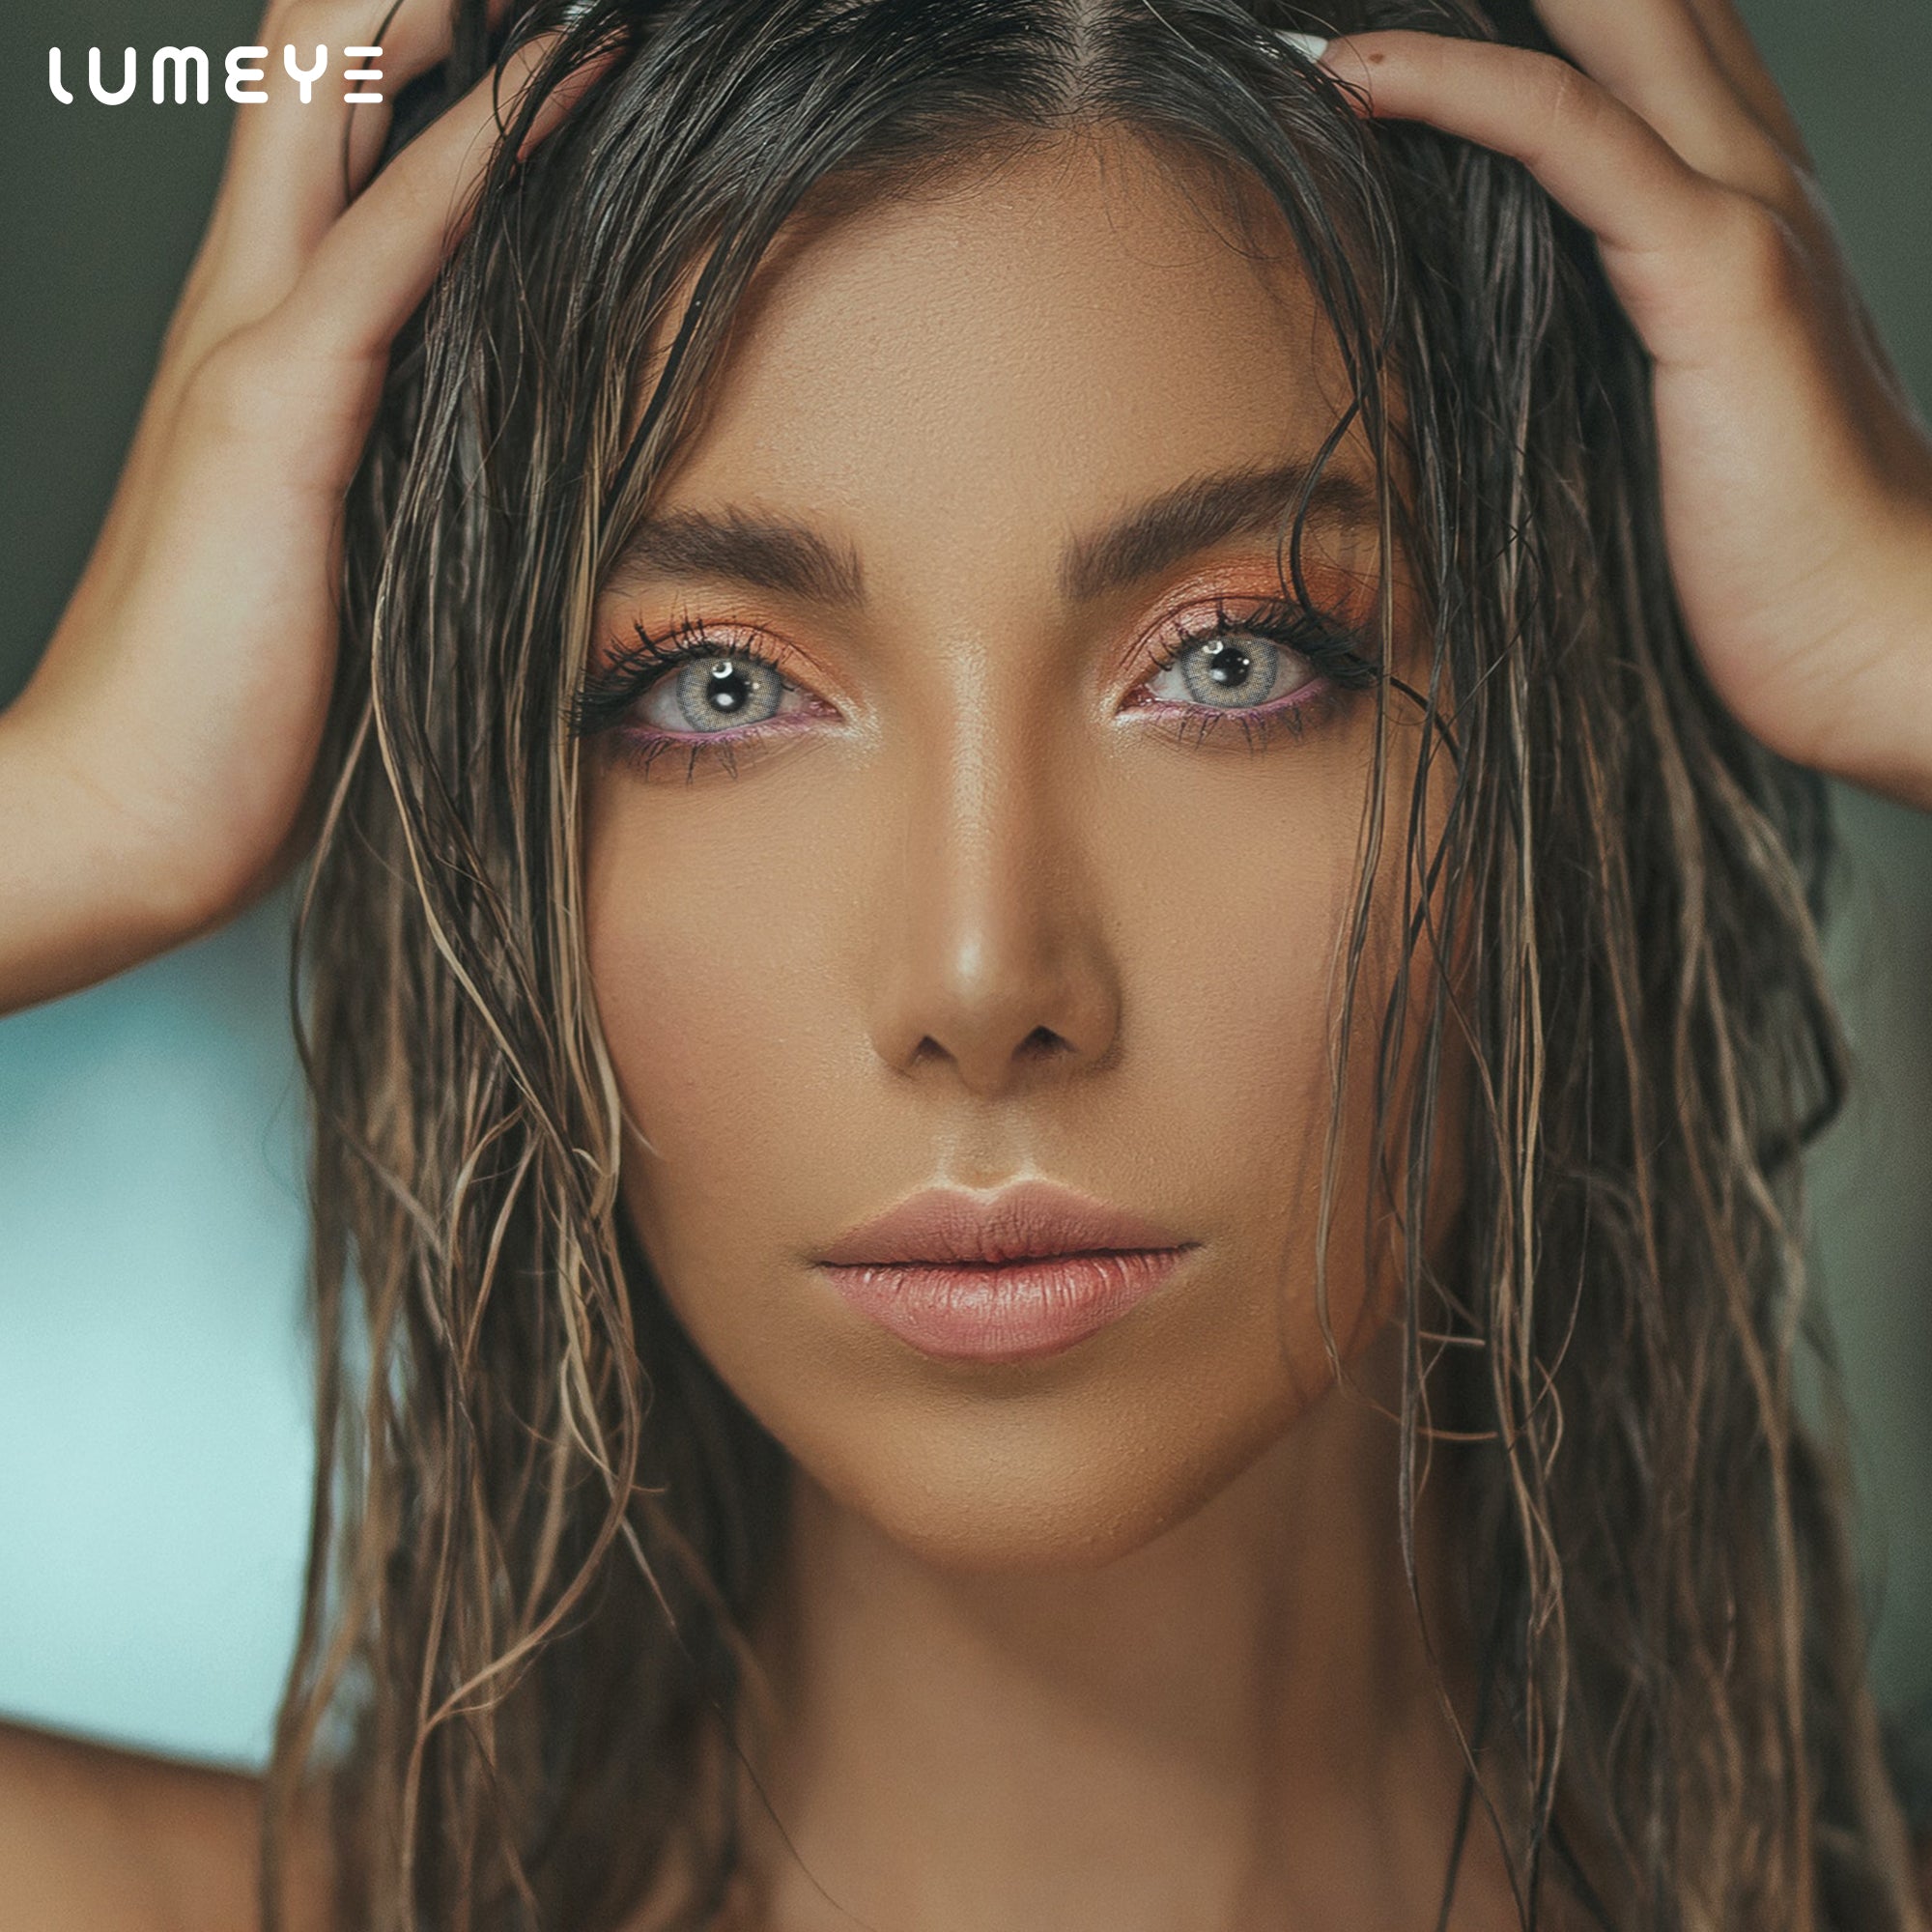 Best COLORED CONTACTS - LUMEYE Queen Gray Colored Contact Lenses - LUMEYE